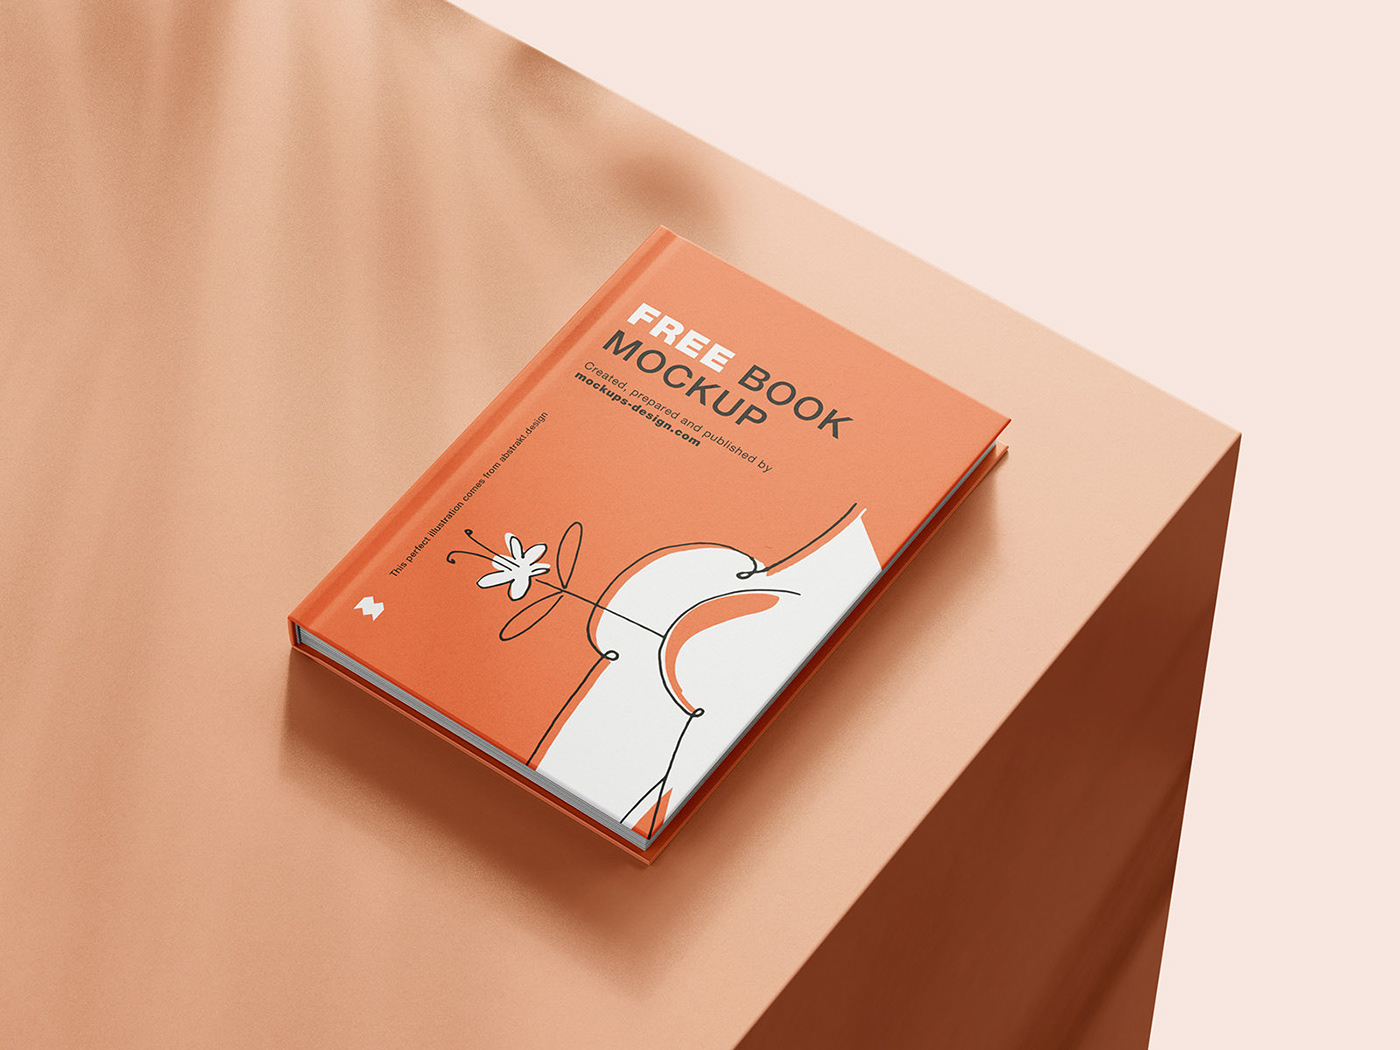 book cover design download free freebie Mockup page temple